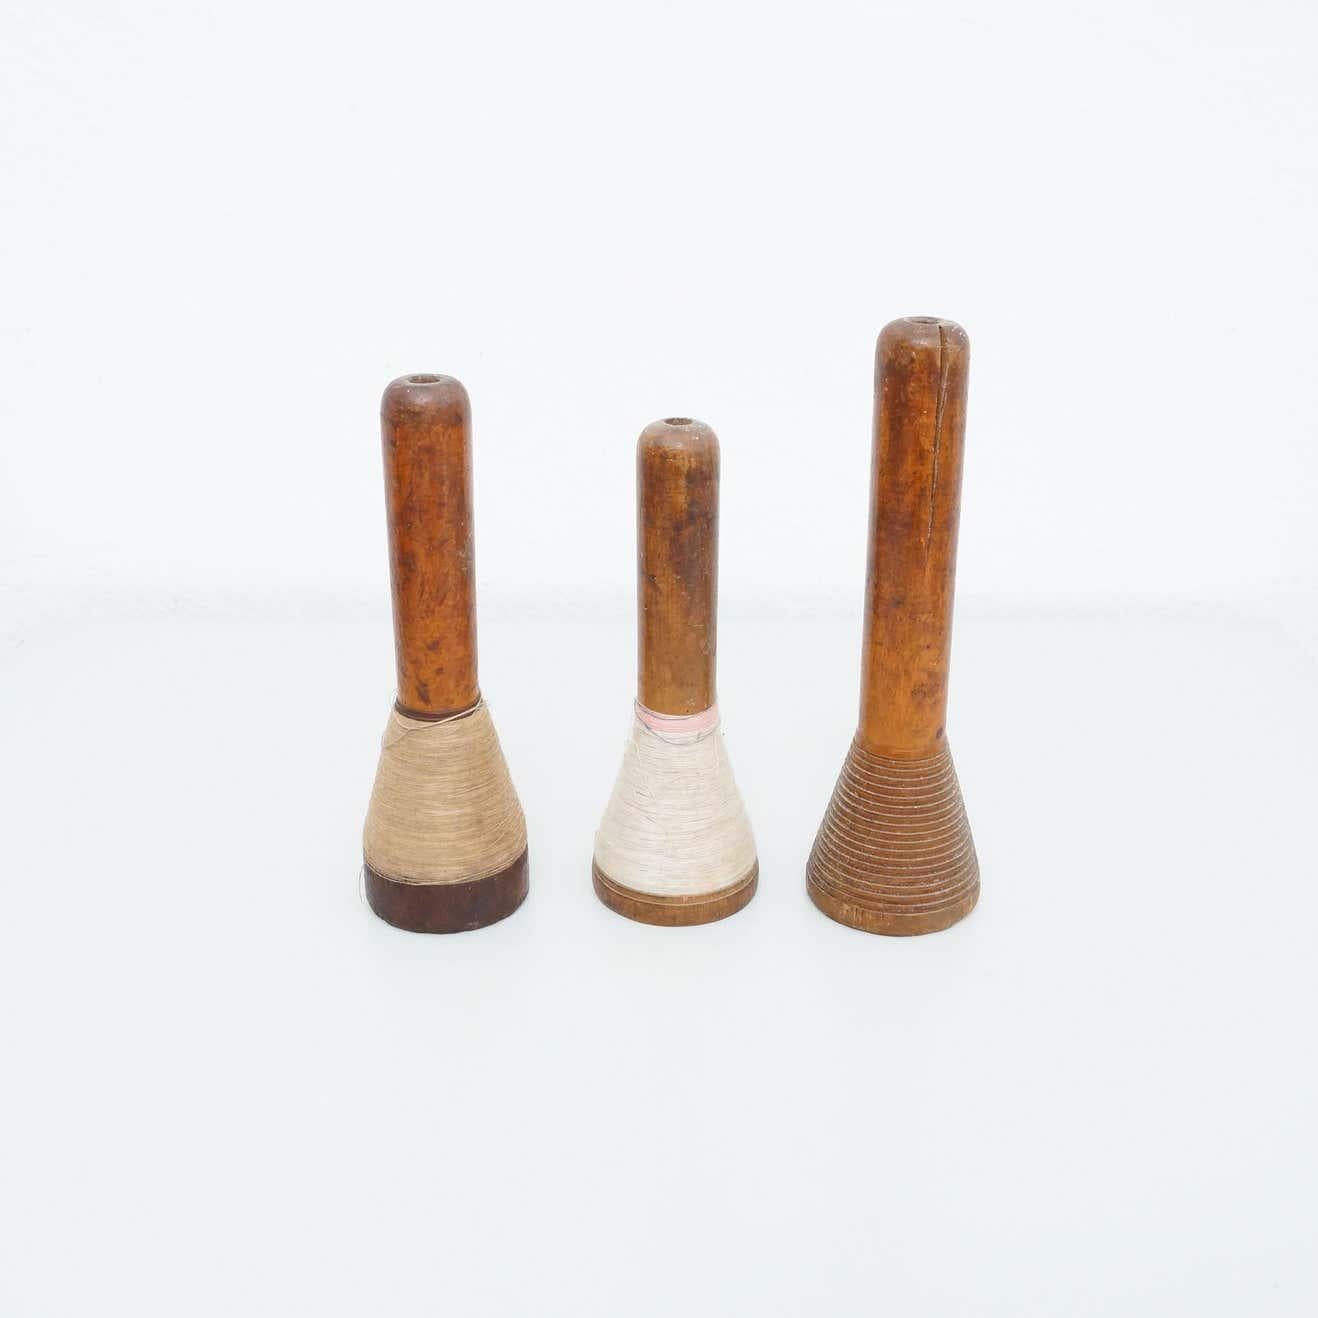 Rustic Wooden Spools of Thread, by unknown manufacturer from Spain, circa 1930.

In original condition, with minor wear consistent with age and use, preserving a beautiful patina.

Materials:
Wood

Dimensions:
Ø 8 cm x H 26 cm.